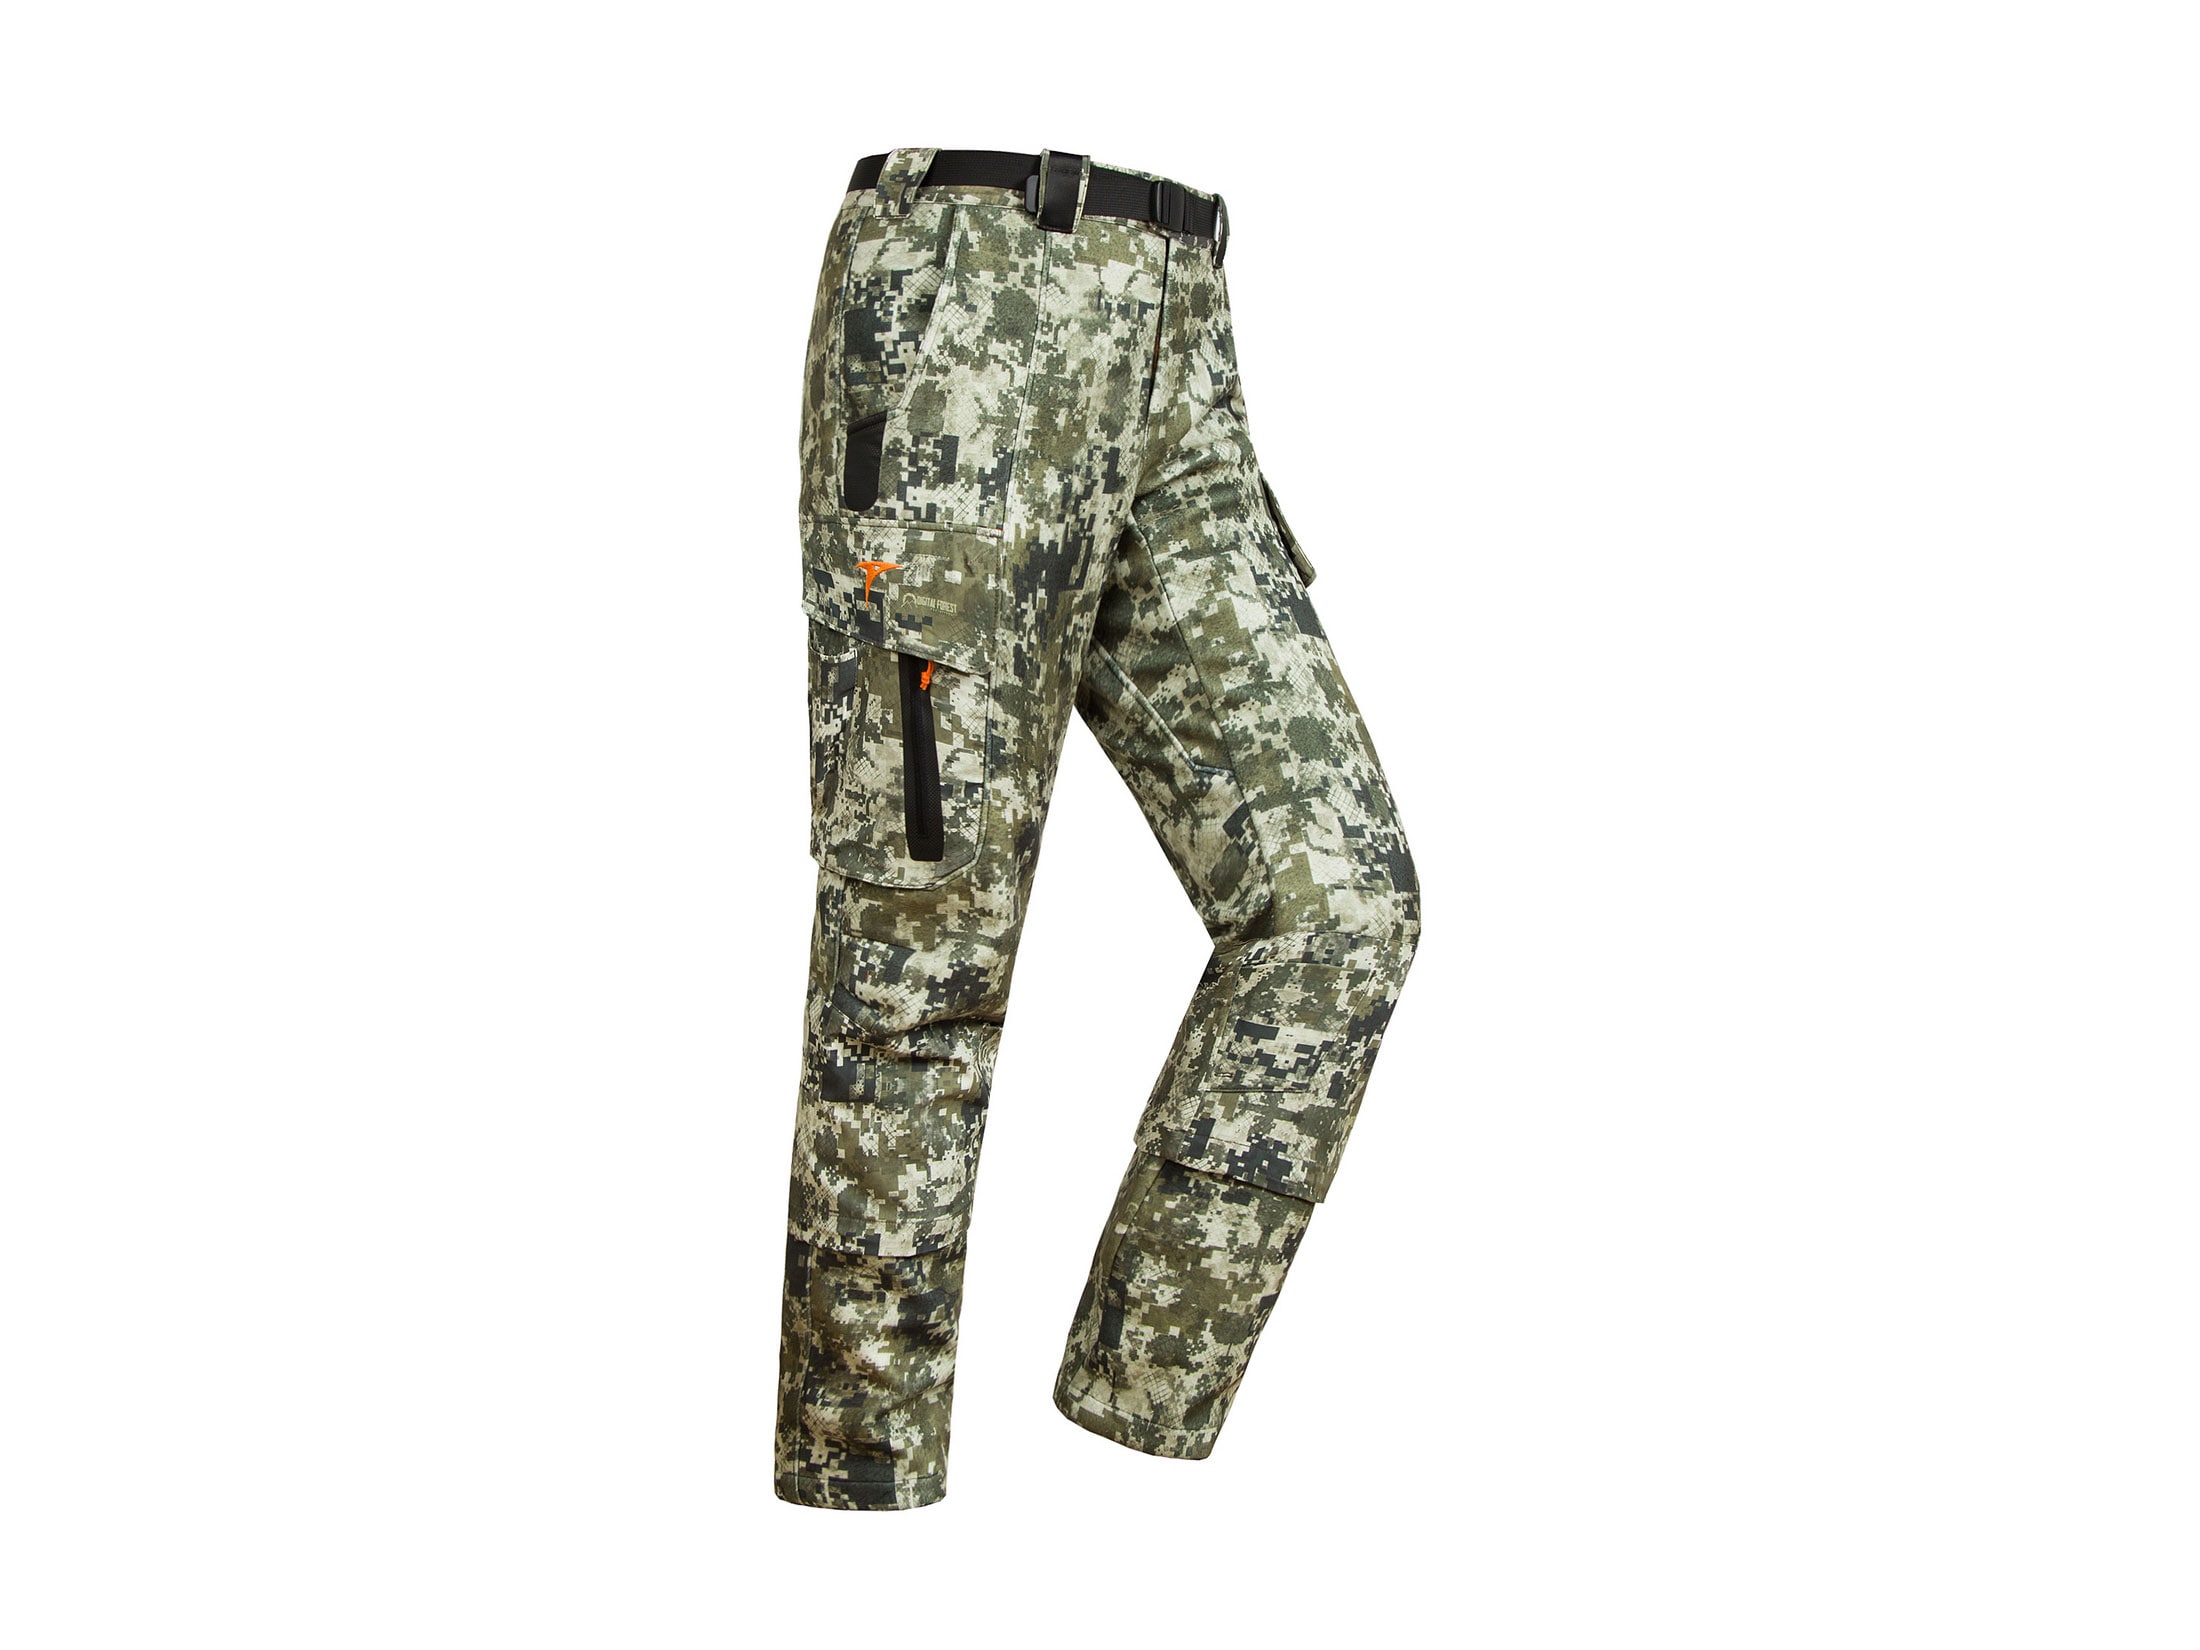 Plythal Men's Heavyweight Full-Rut Extreme Insulated Pants Polyester